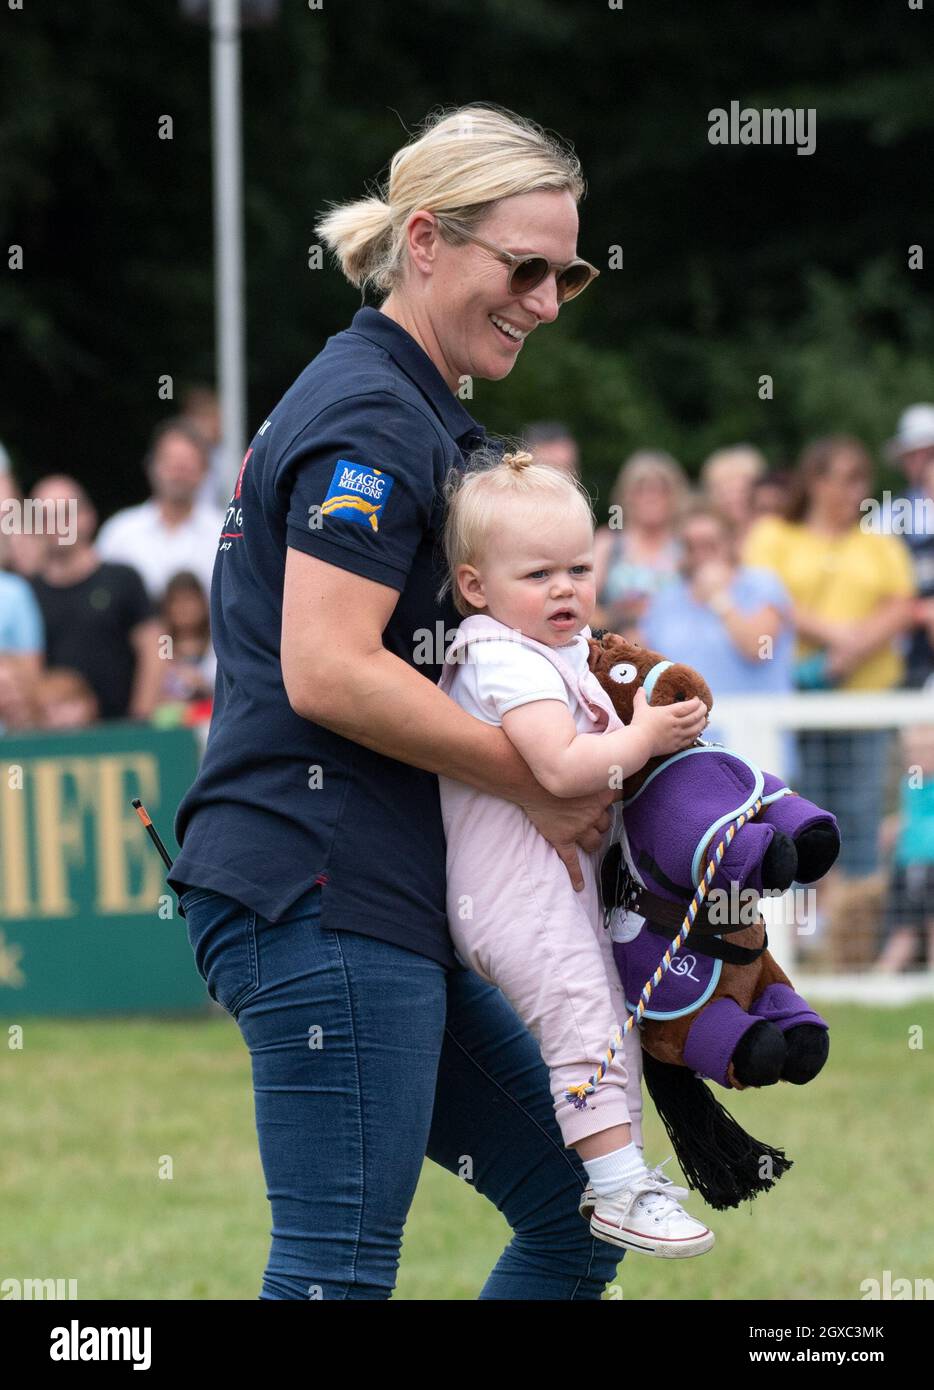 Zara Tindall carries daughter Lena Tindall as Savannah Phillips looks on  during the Festival of British Eventing at Gatcombe Park Stock Photo - Alamy